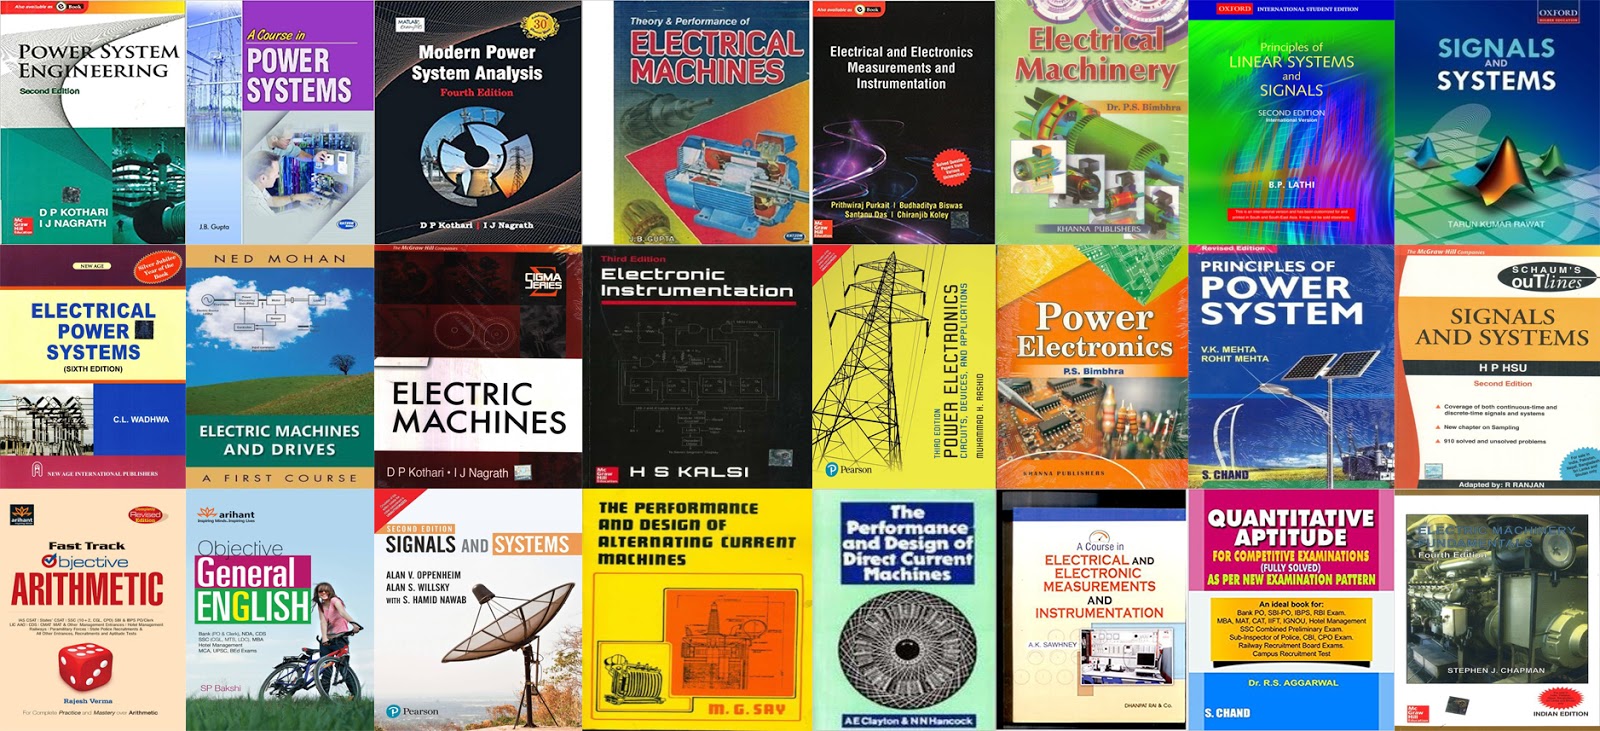 Electronic measurements and instrumentation by kalsi ebook free download